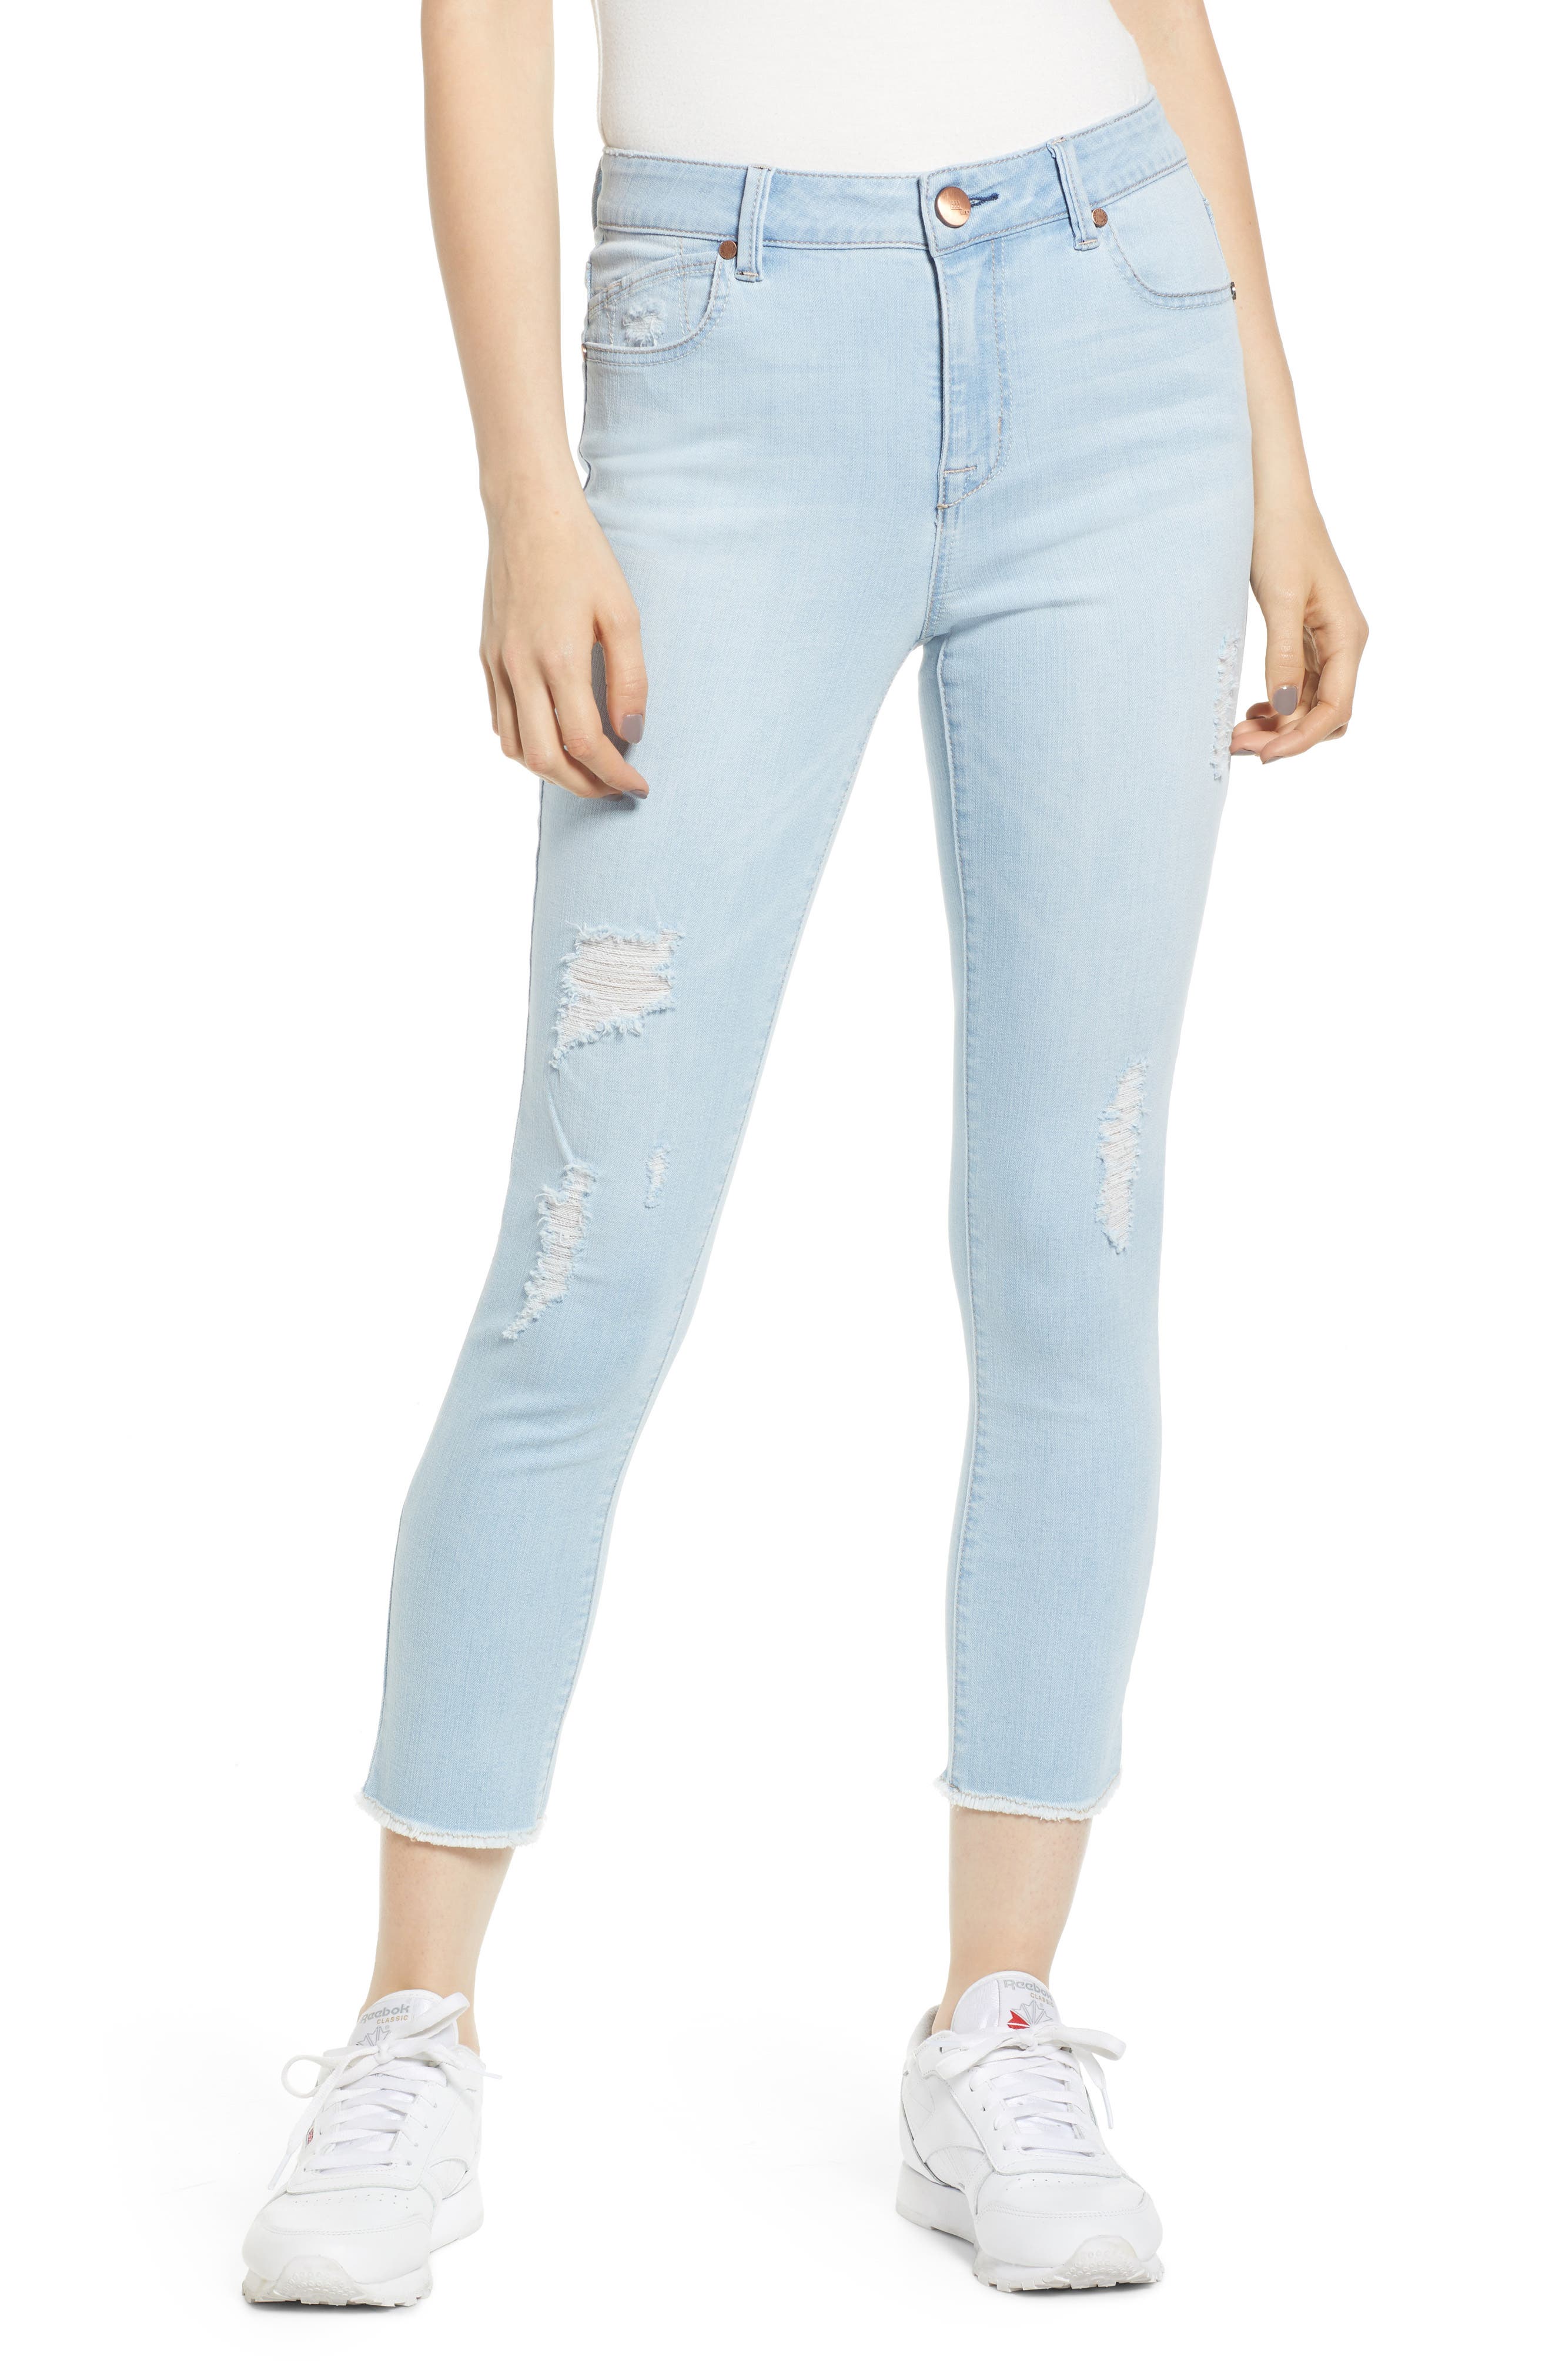 high waisted cropped jeggings